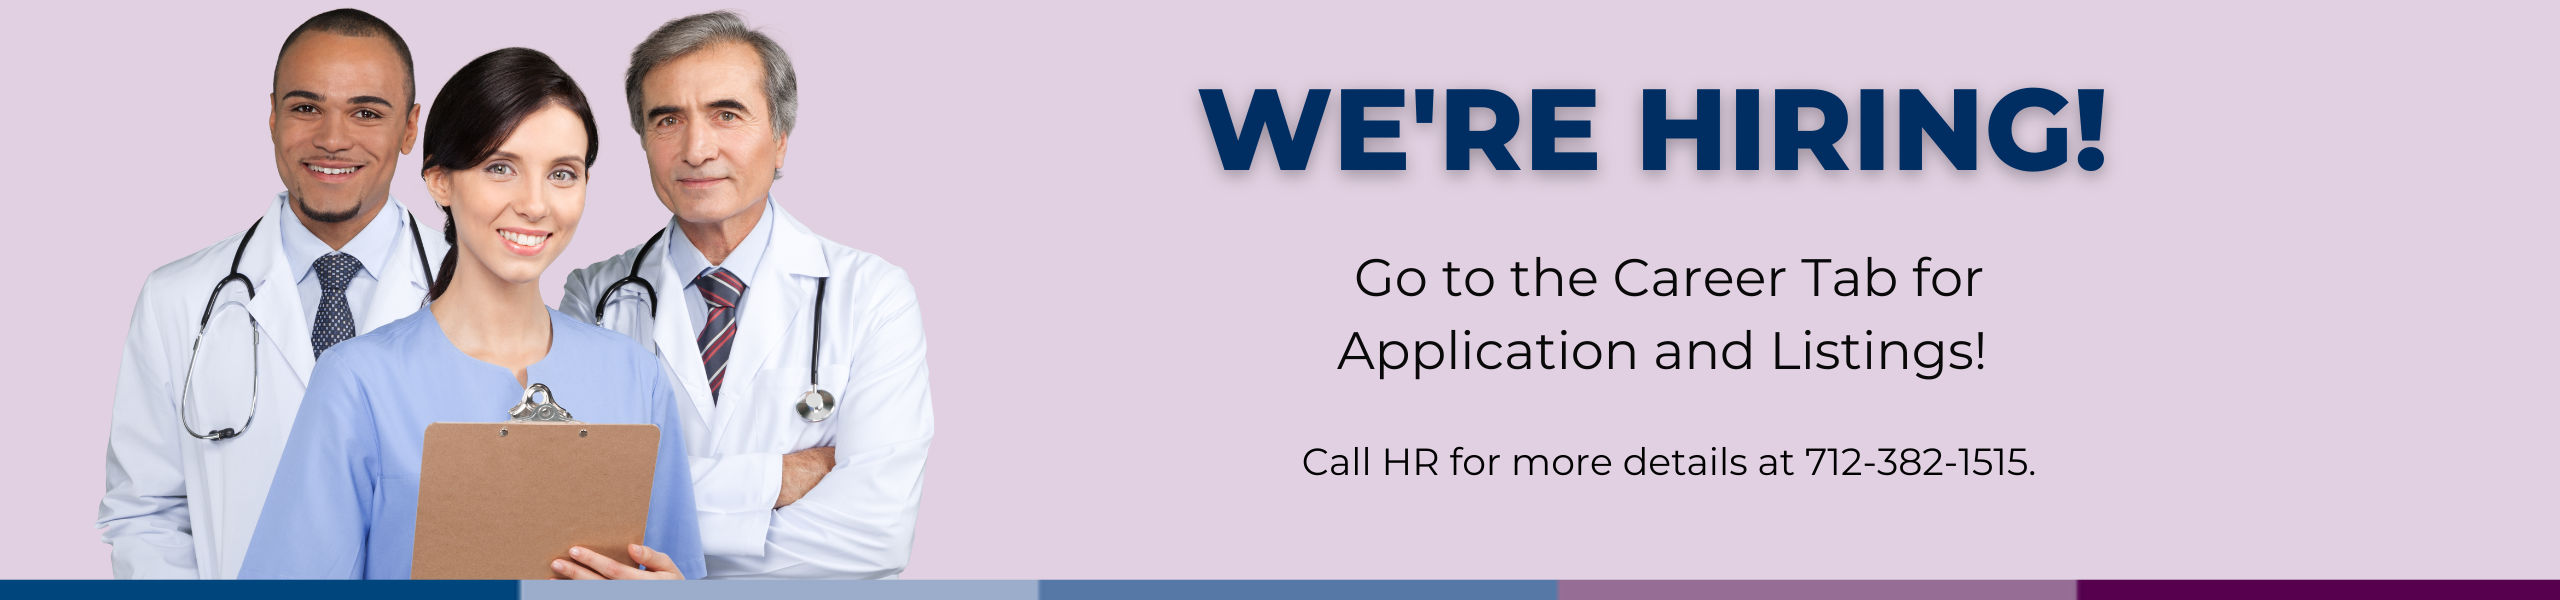 We're Hiring!
Go to the Career Tab for Application and Listings!
Call HR for more details at 712-382-1515.